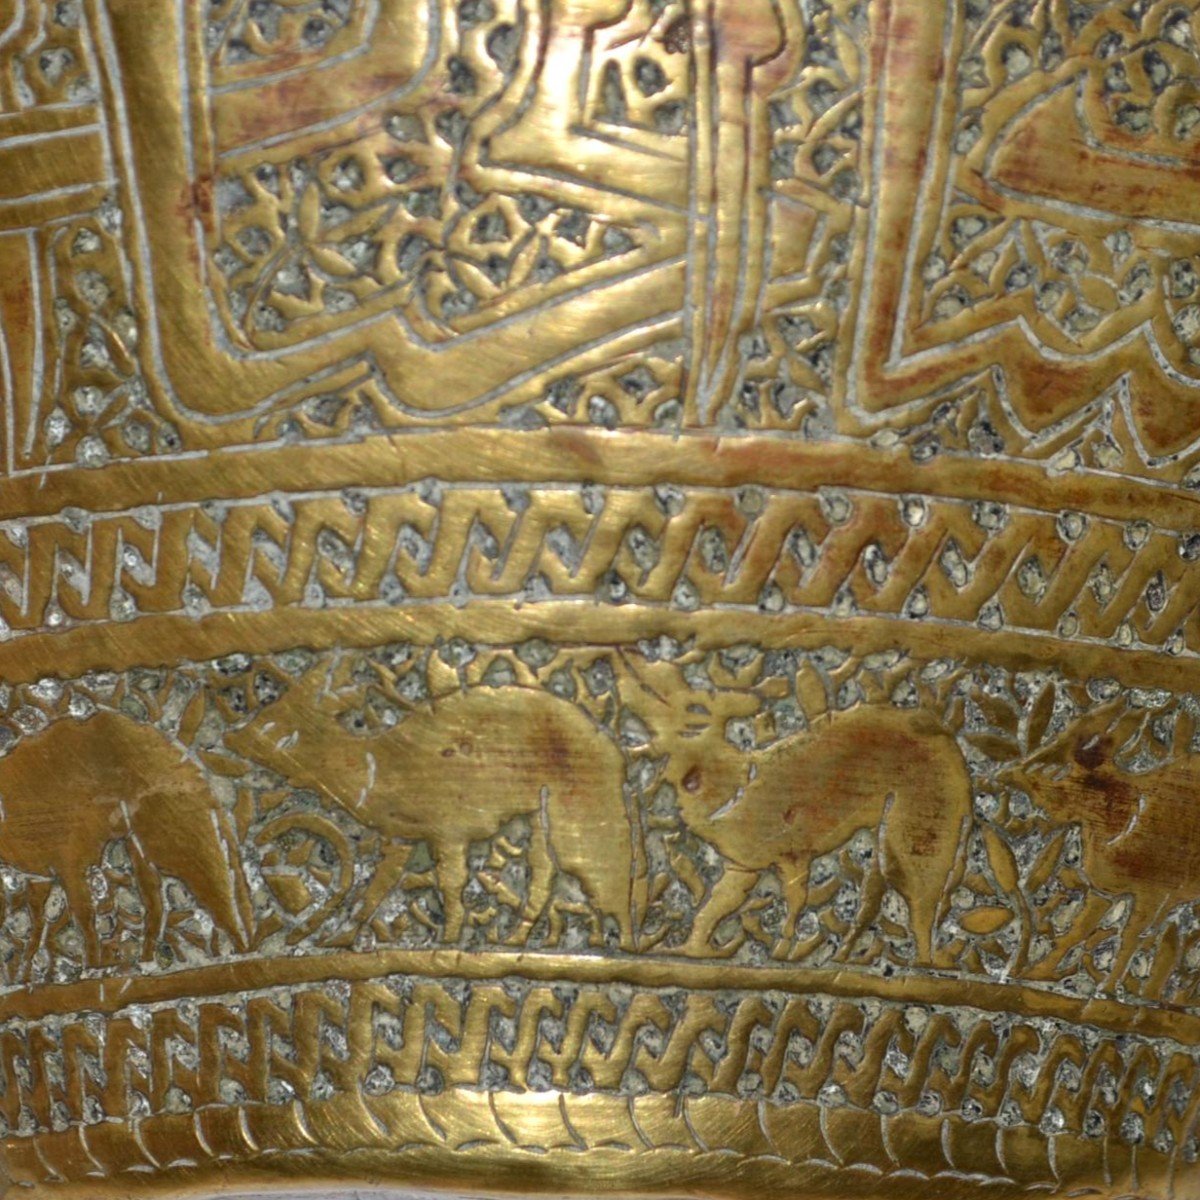 Indo-persian Basin In Chiseled Brass, Decorated With Chitals And Calligraphy, From The 19th Century-photo-5